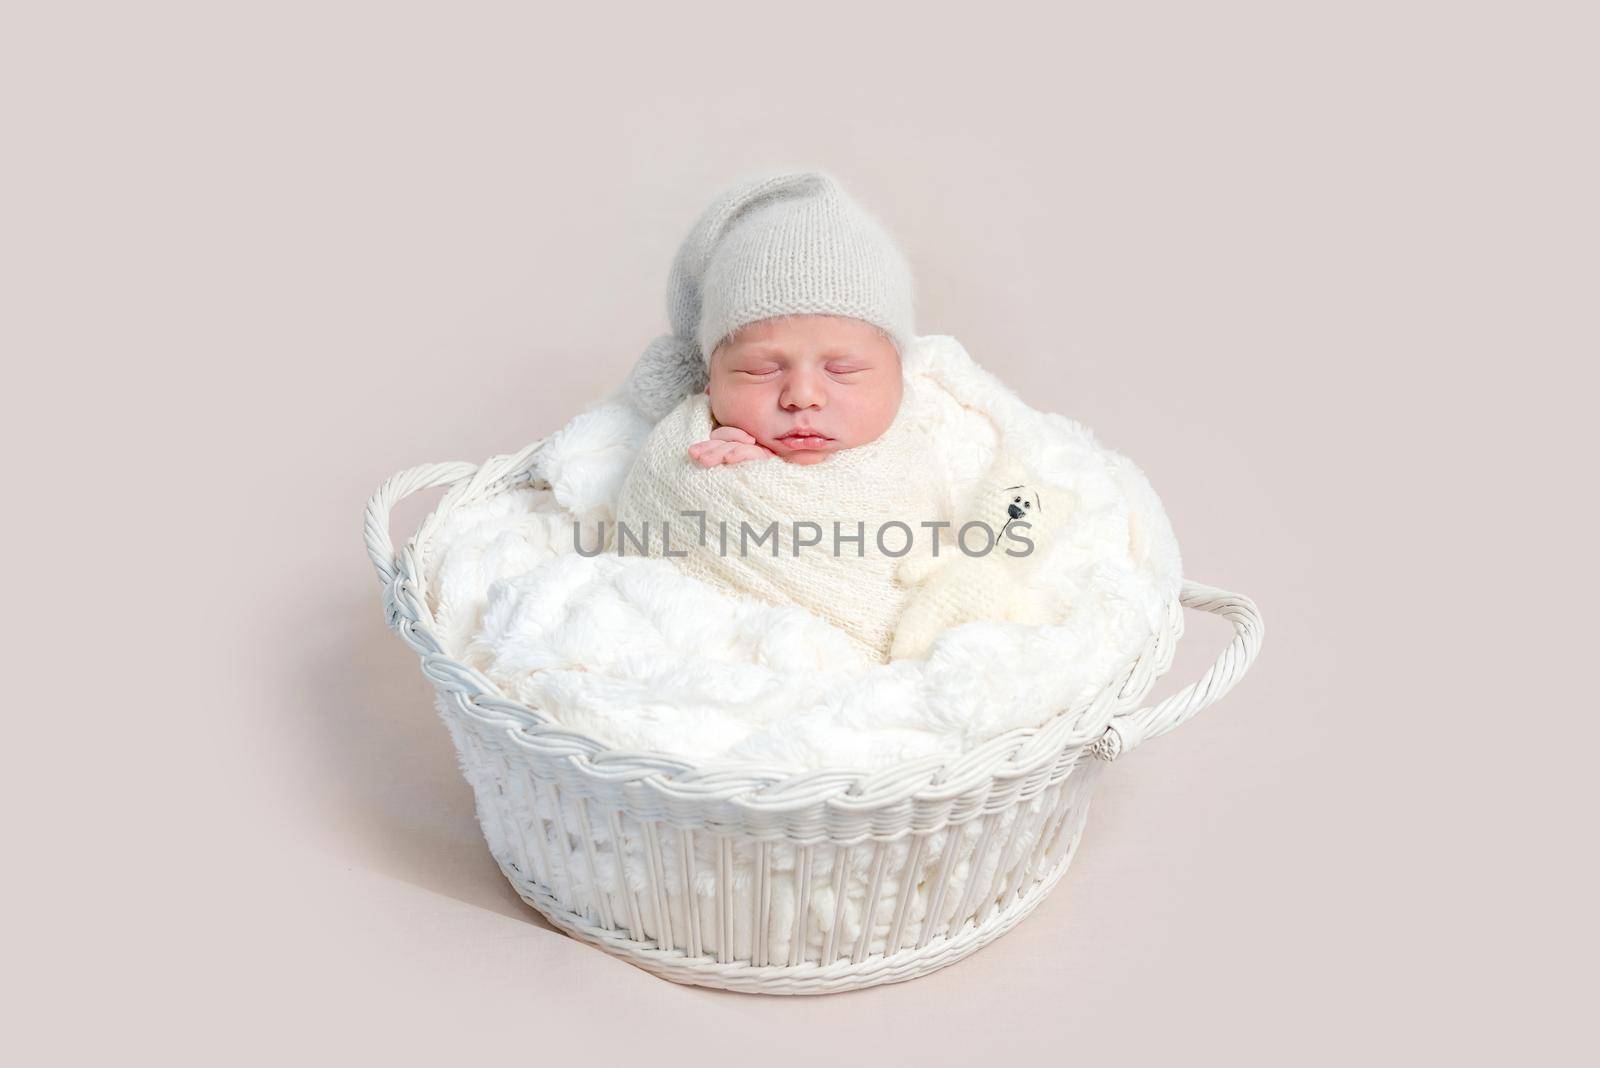 Top view of newborn baby wrapped in white wrap wearing white bonnet and lying on white round basket with soft blanket. Newborn baby in white outfit